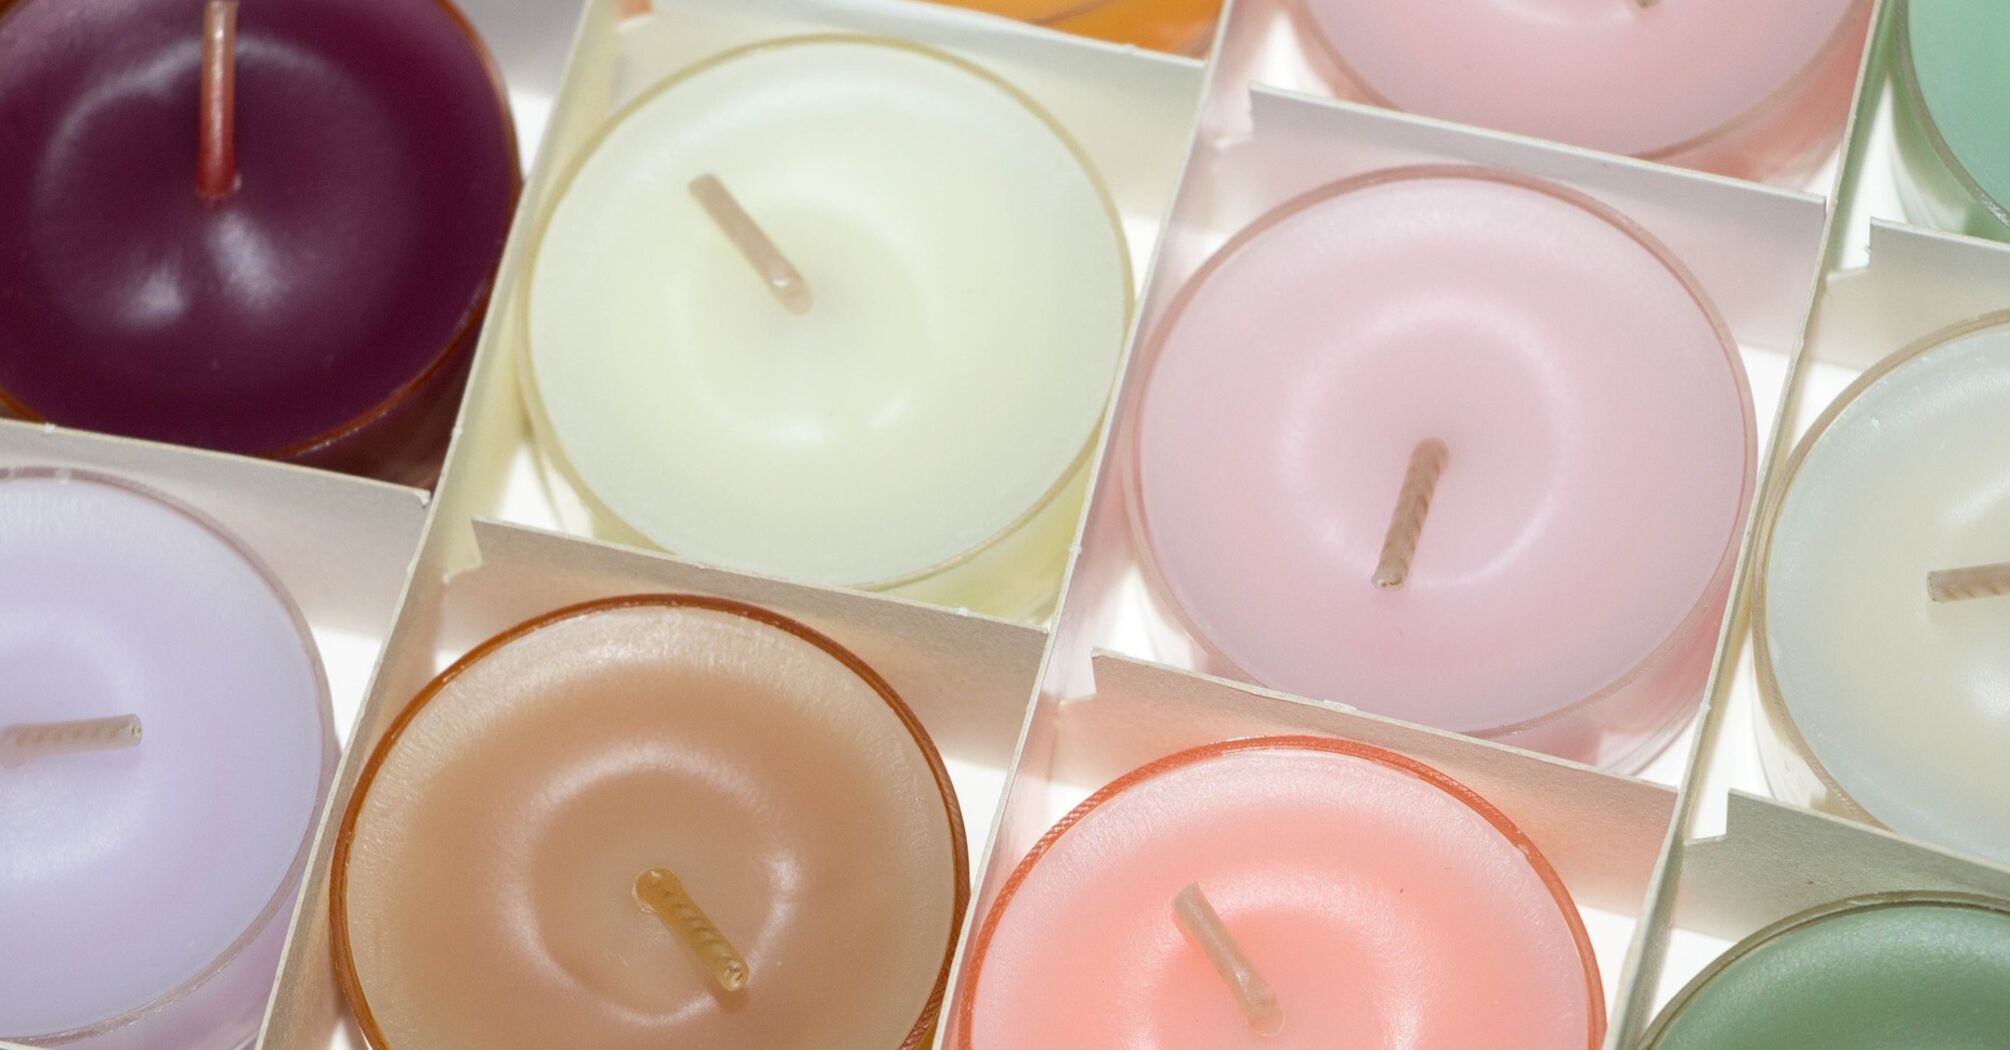 Doctor explains why scented candles should be avoided